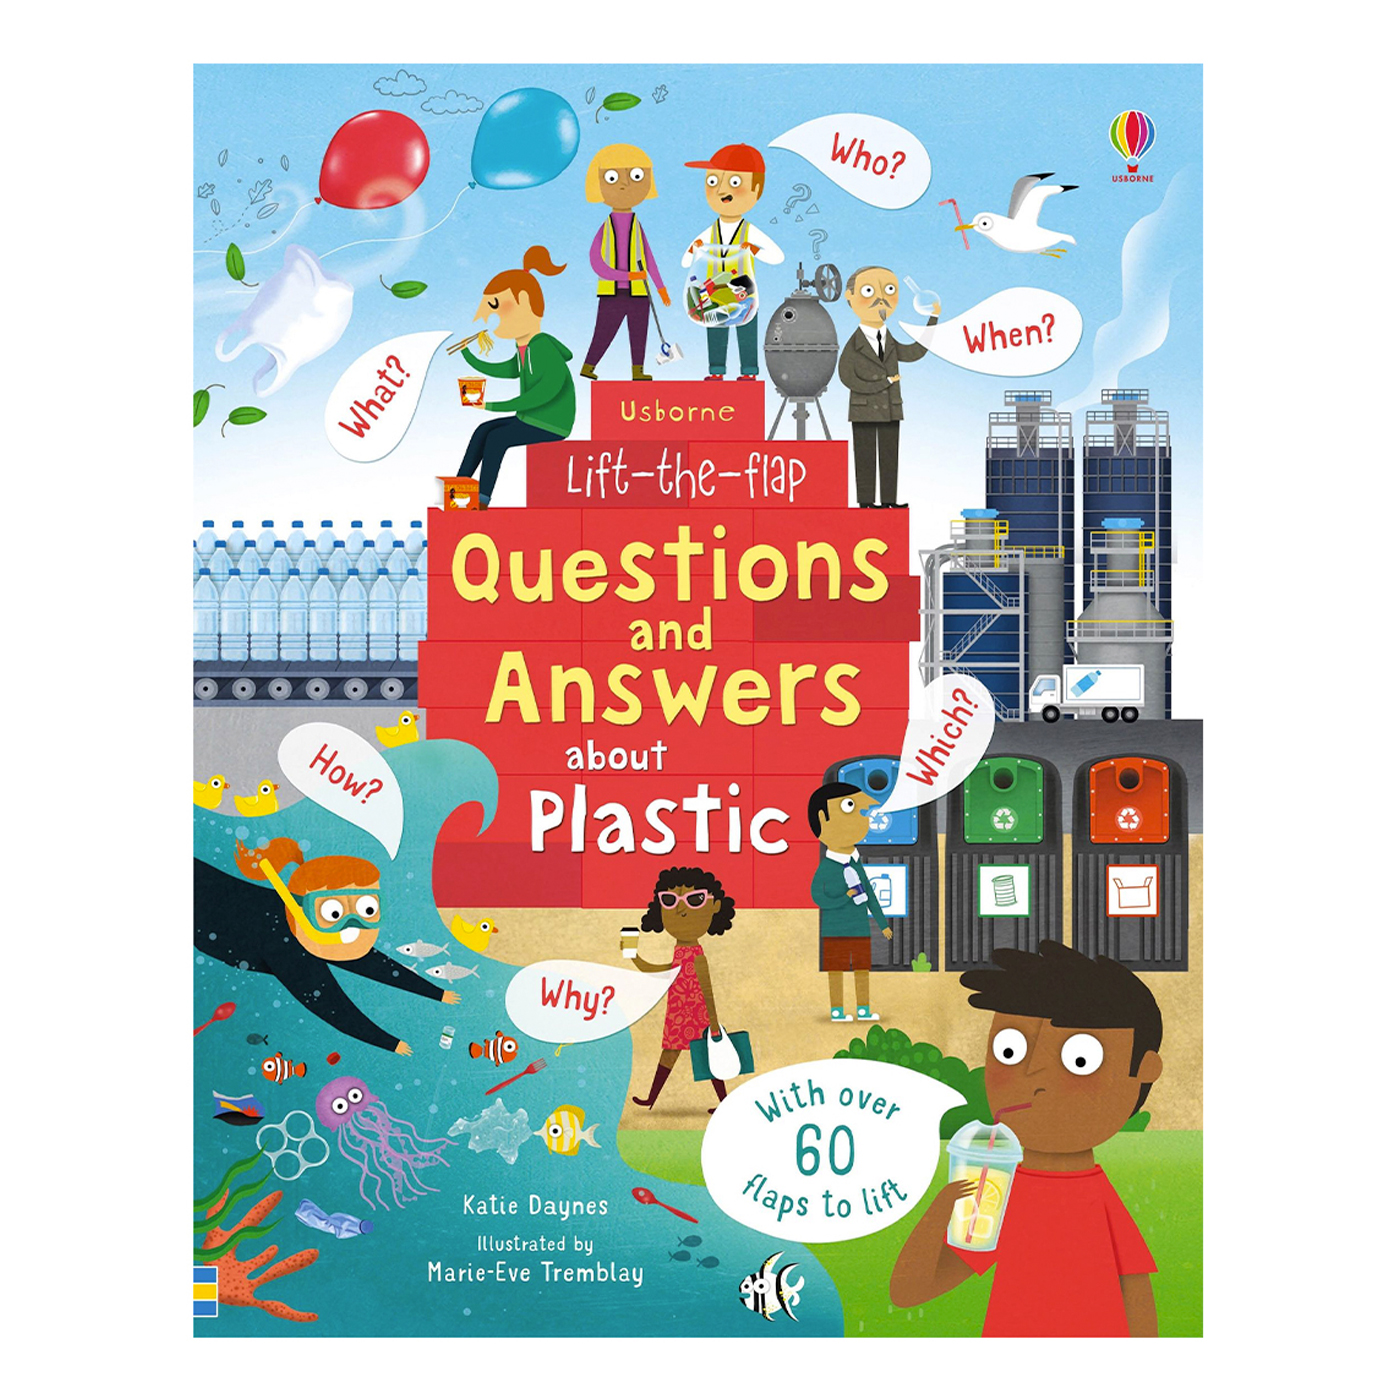  Lift-the-flap Questions And Answers About Plastic